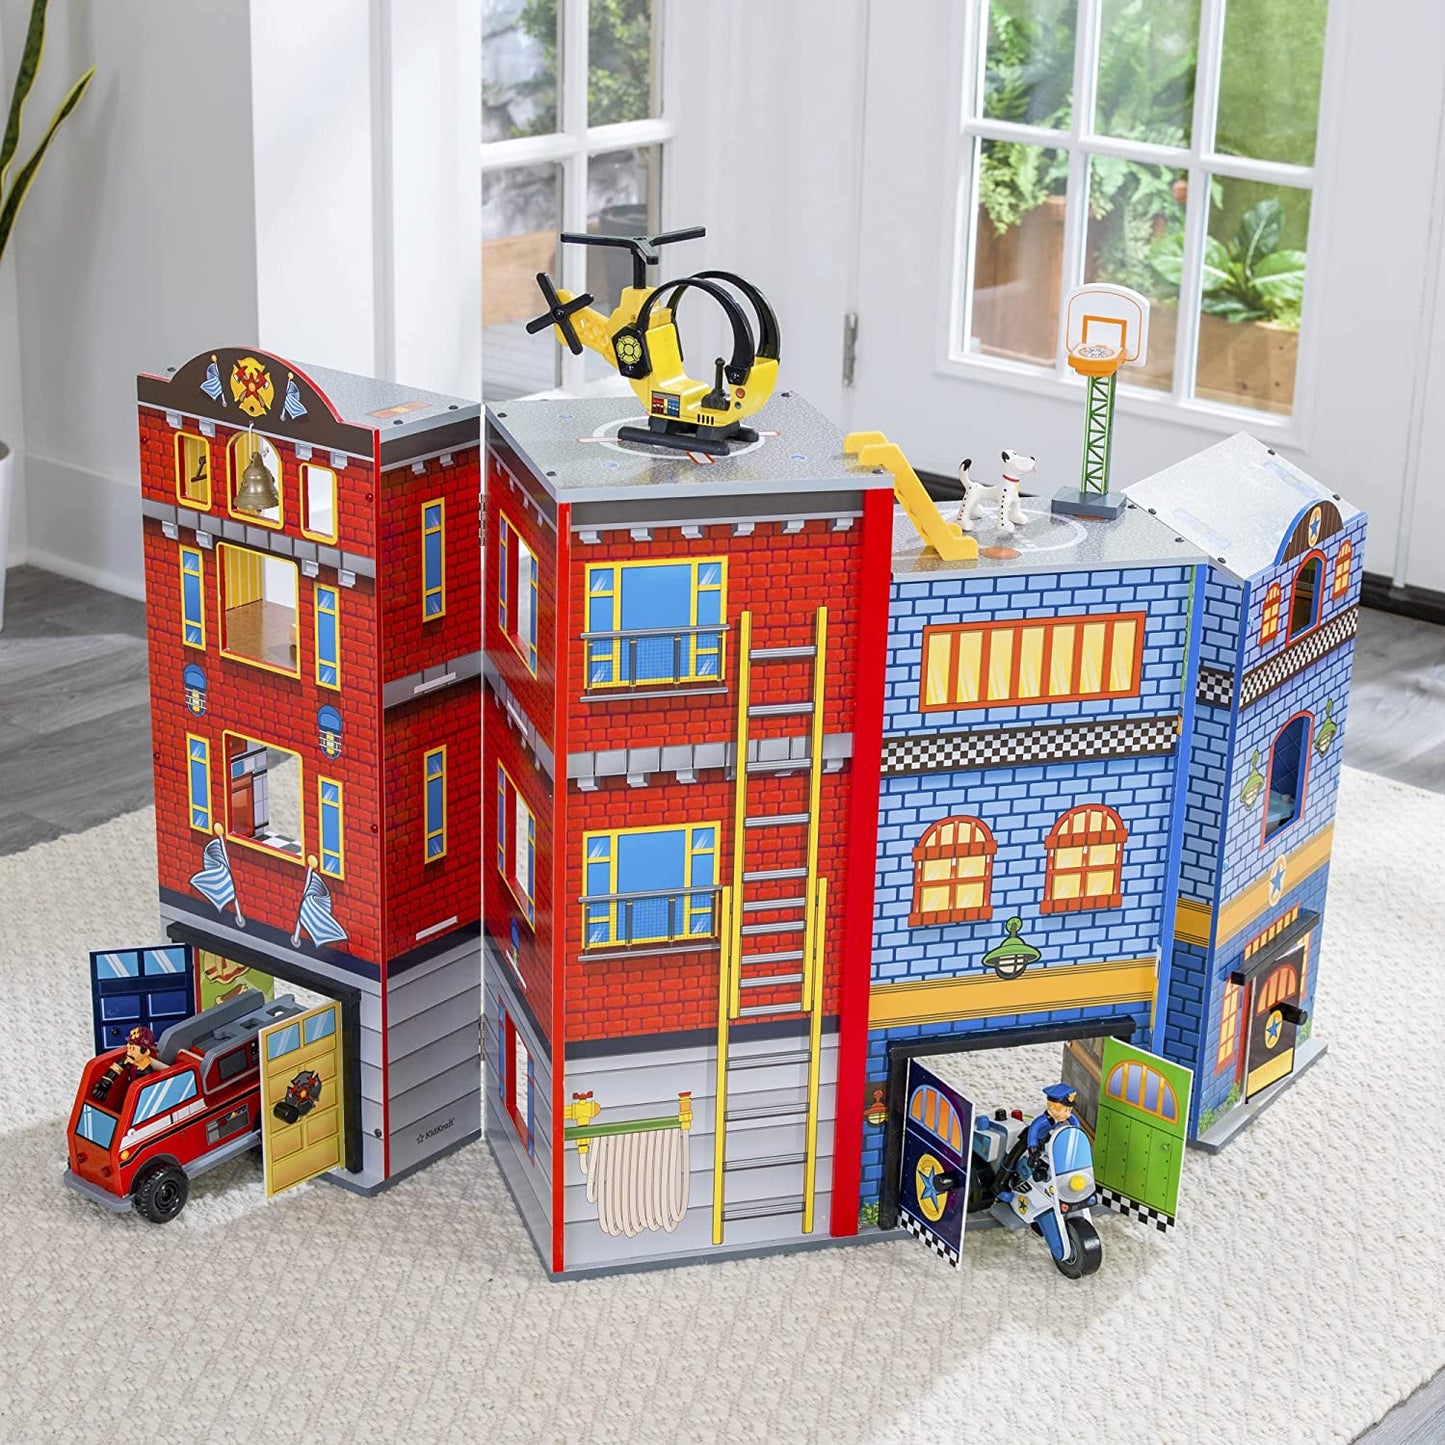 Everyday Heroes Play Set for kids - image6